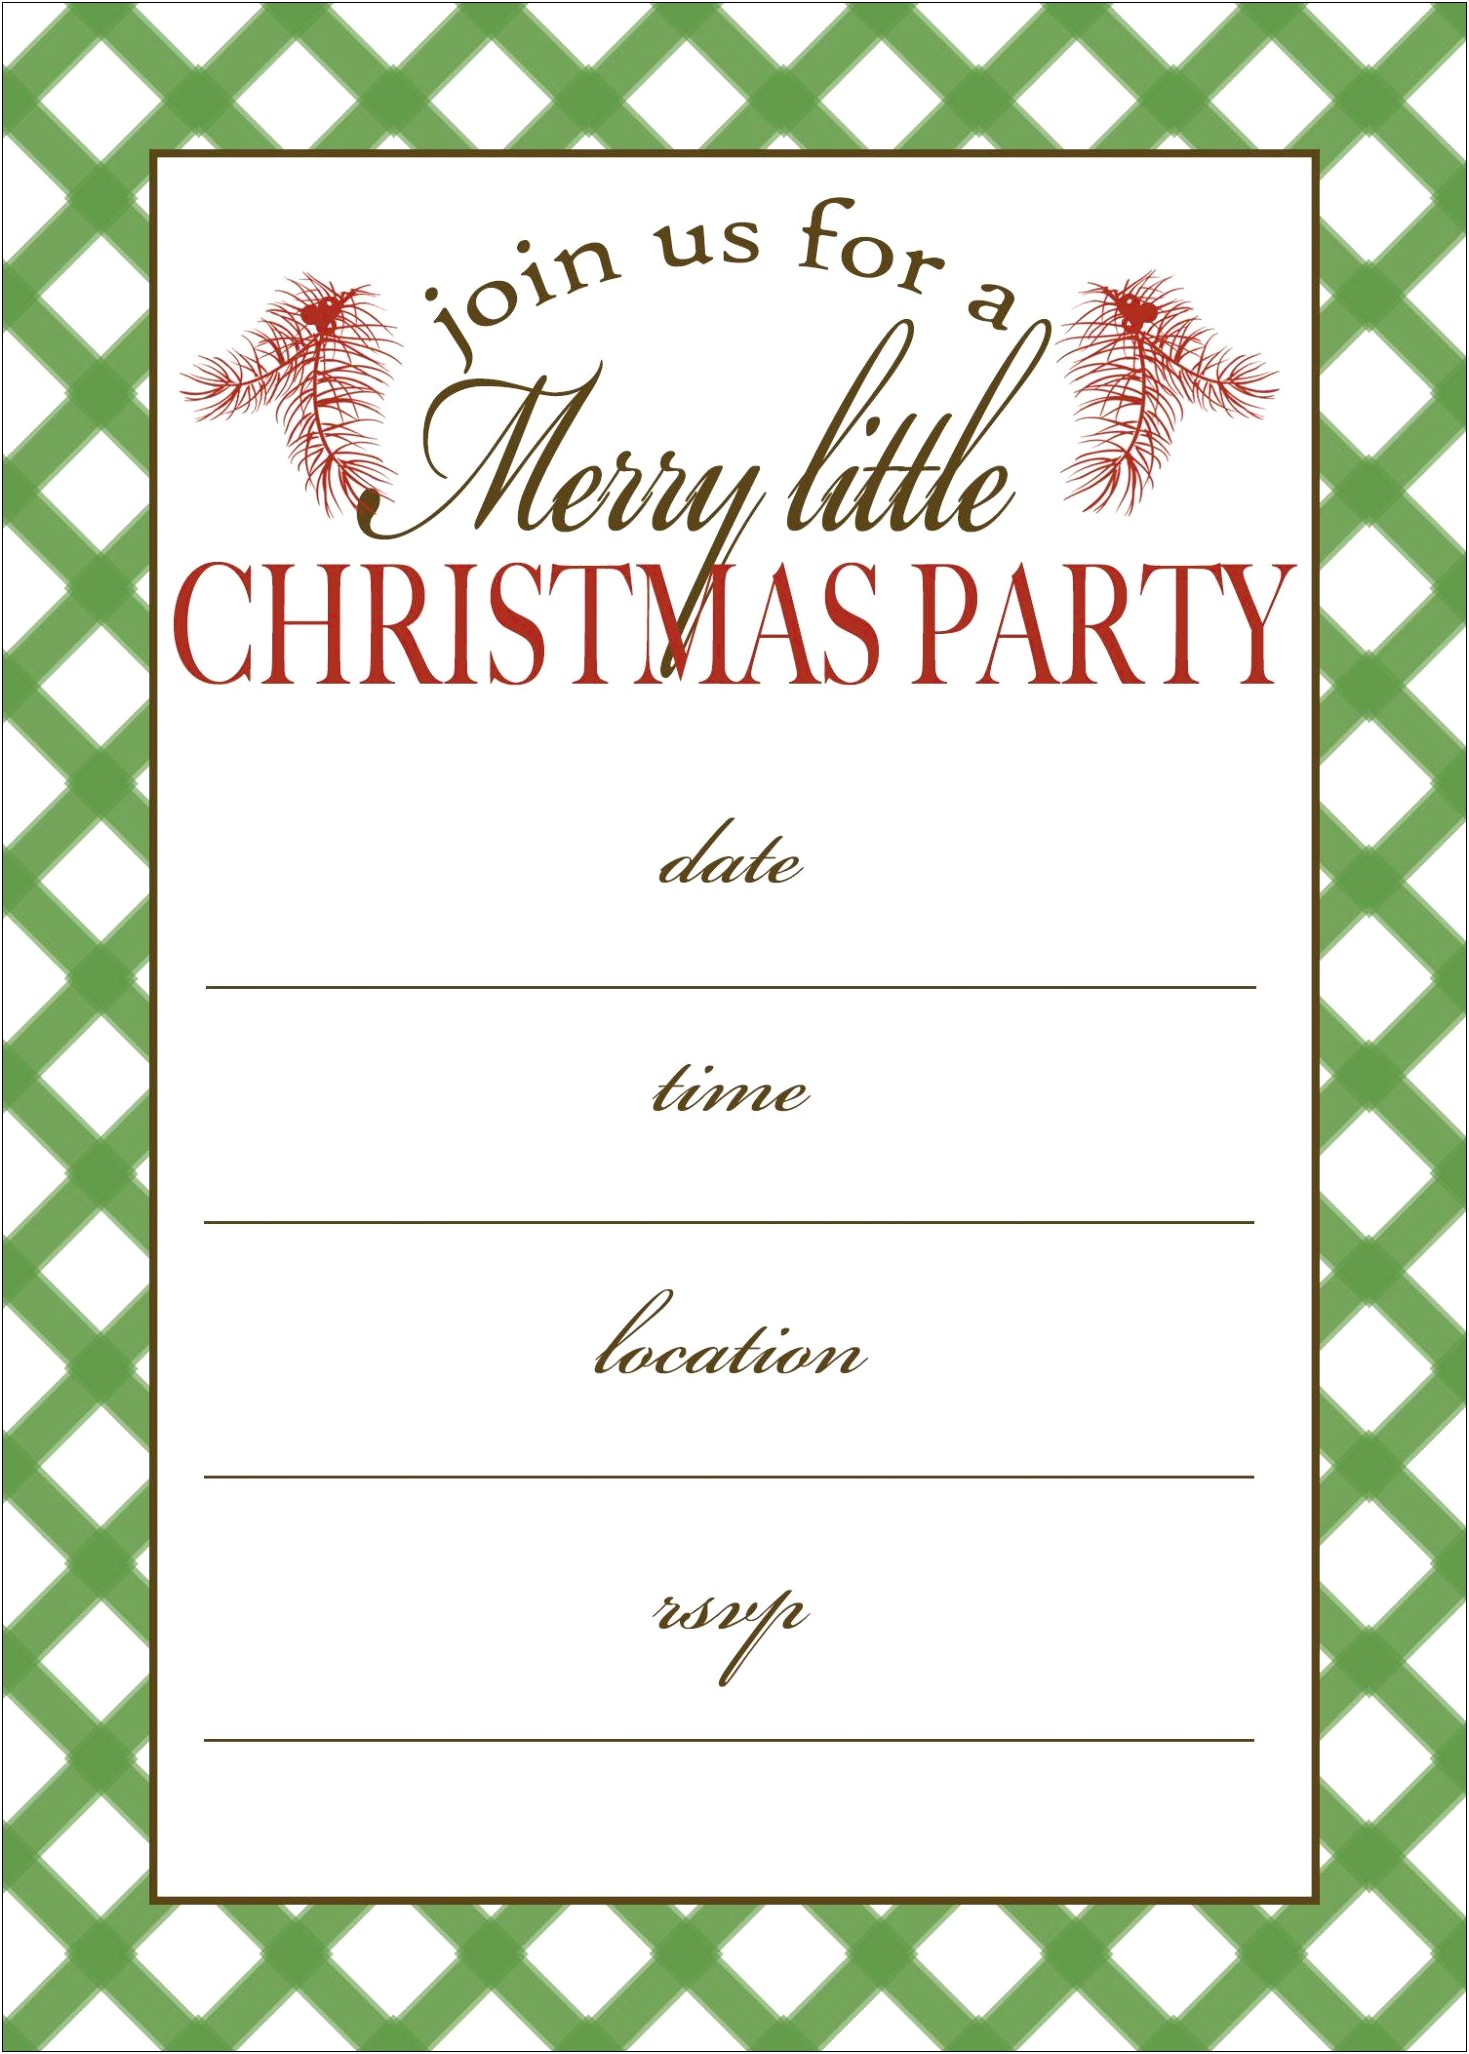 Free Christmas In July Invitations Templates